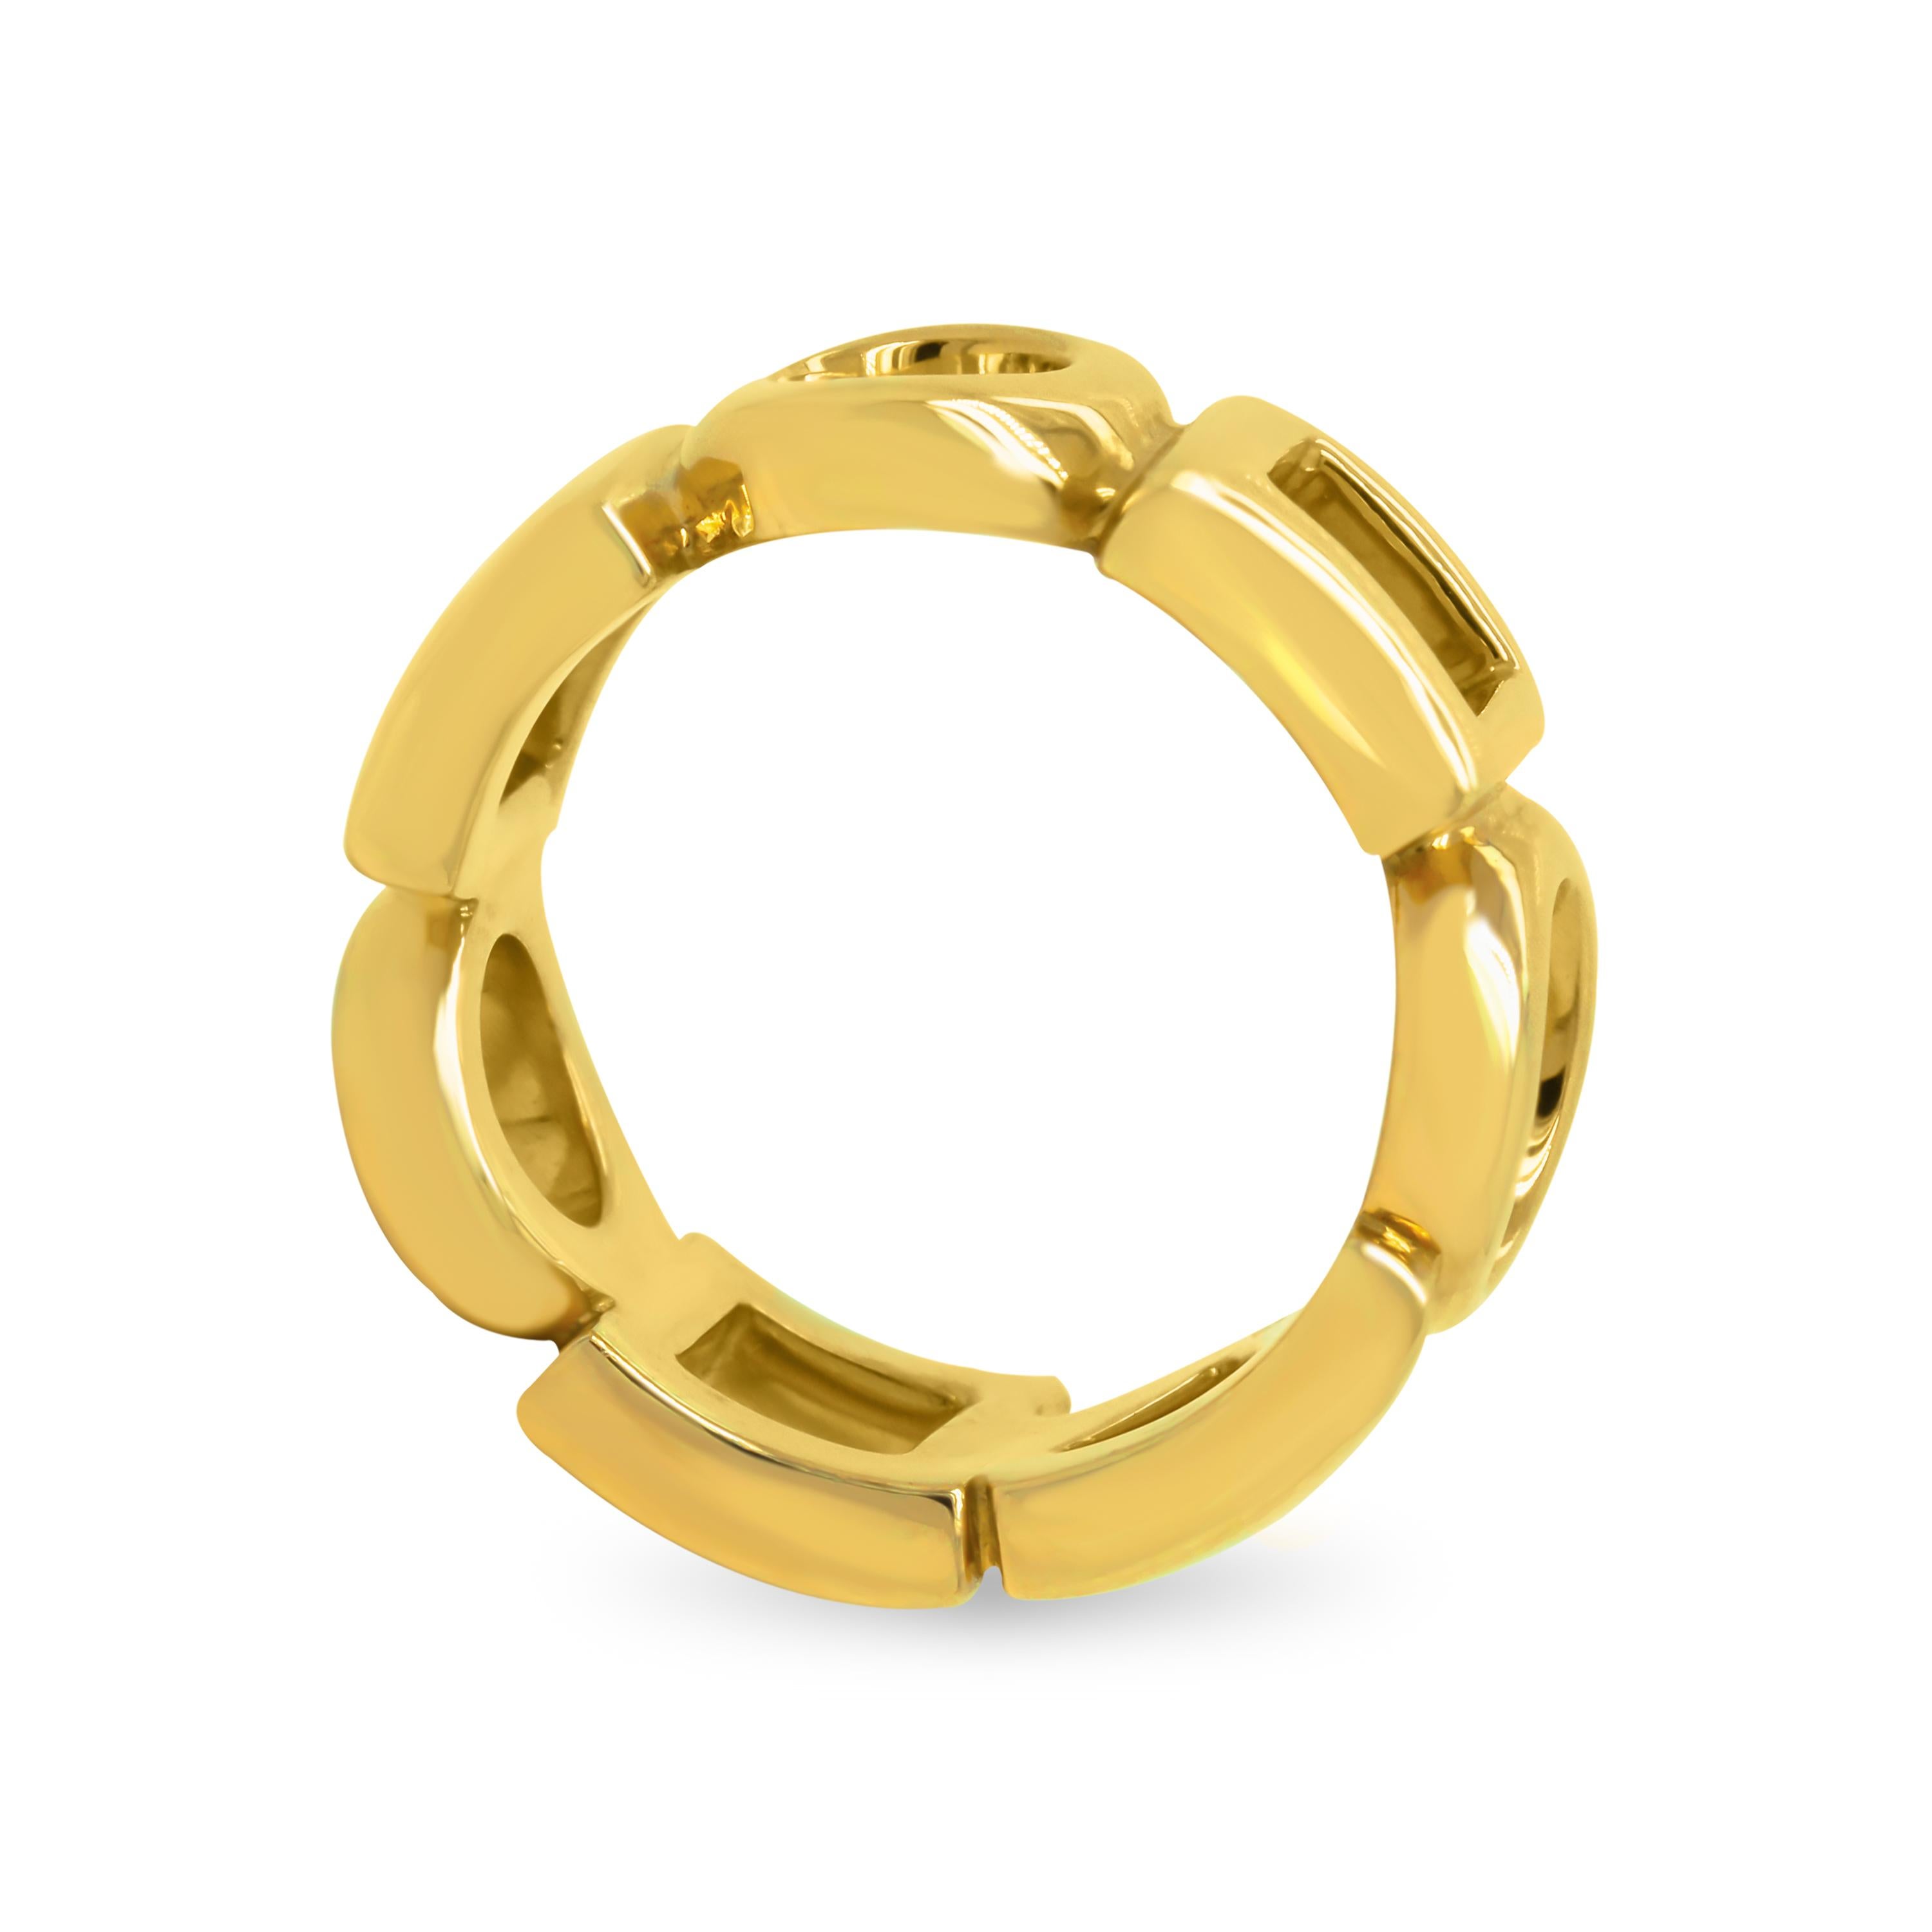 Chanel 18 Karat Yellow Gold Square Triangle Circle Wide Band Ring

This fun and everyday ring by Chanel features a cute design that has a triangle, circle, square alternating.

Ring is a size 6.50. 9.7mm band width.

Signed Chanel.